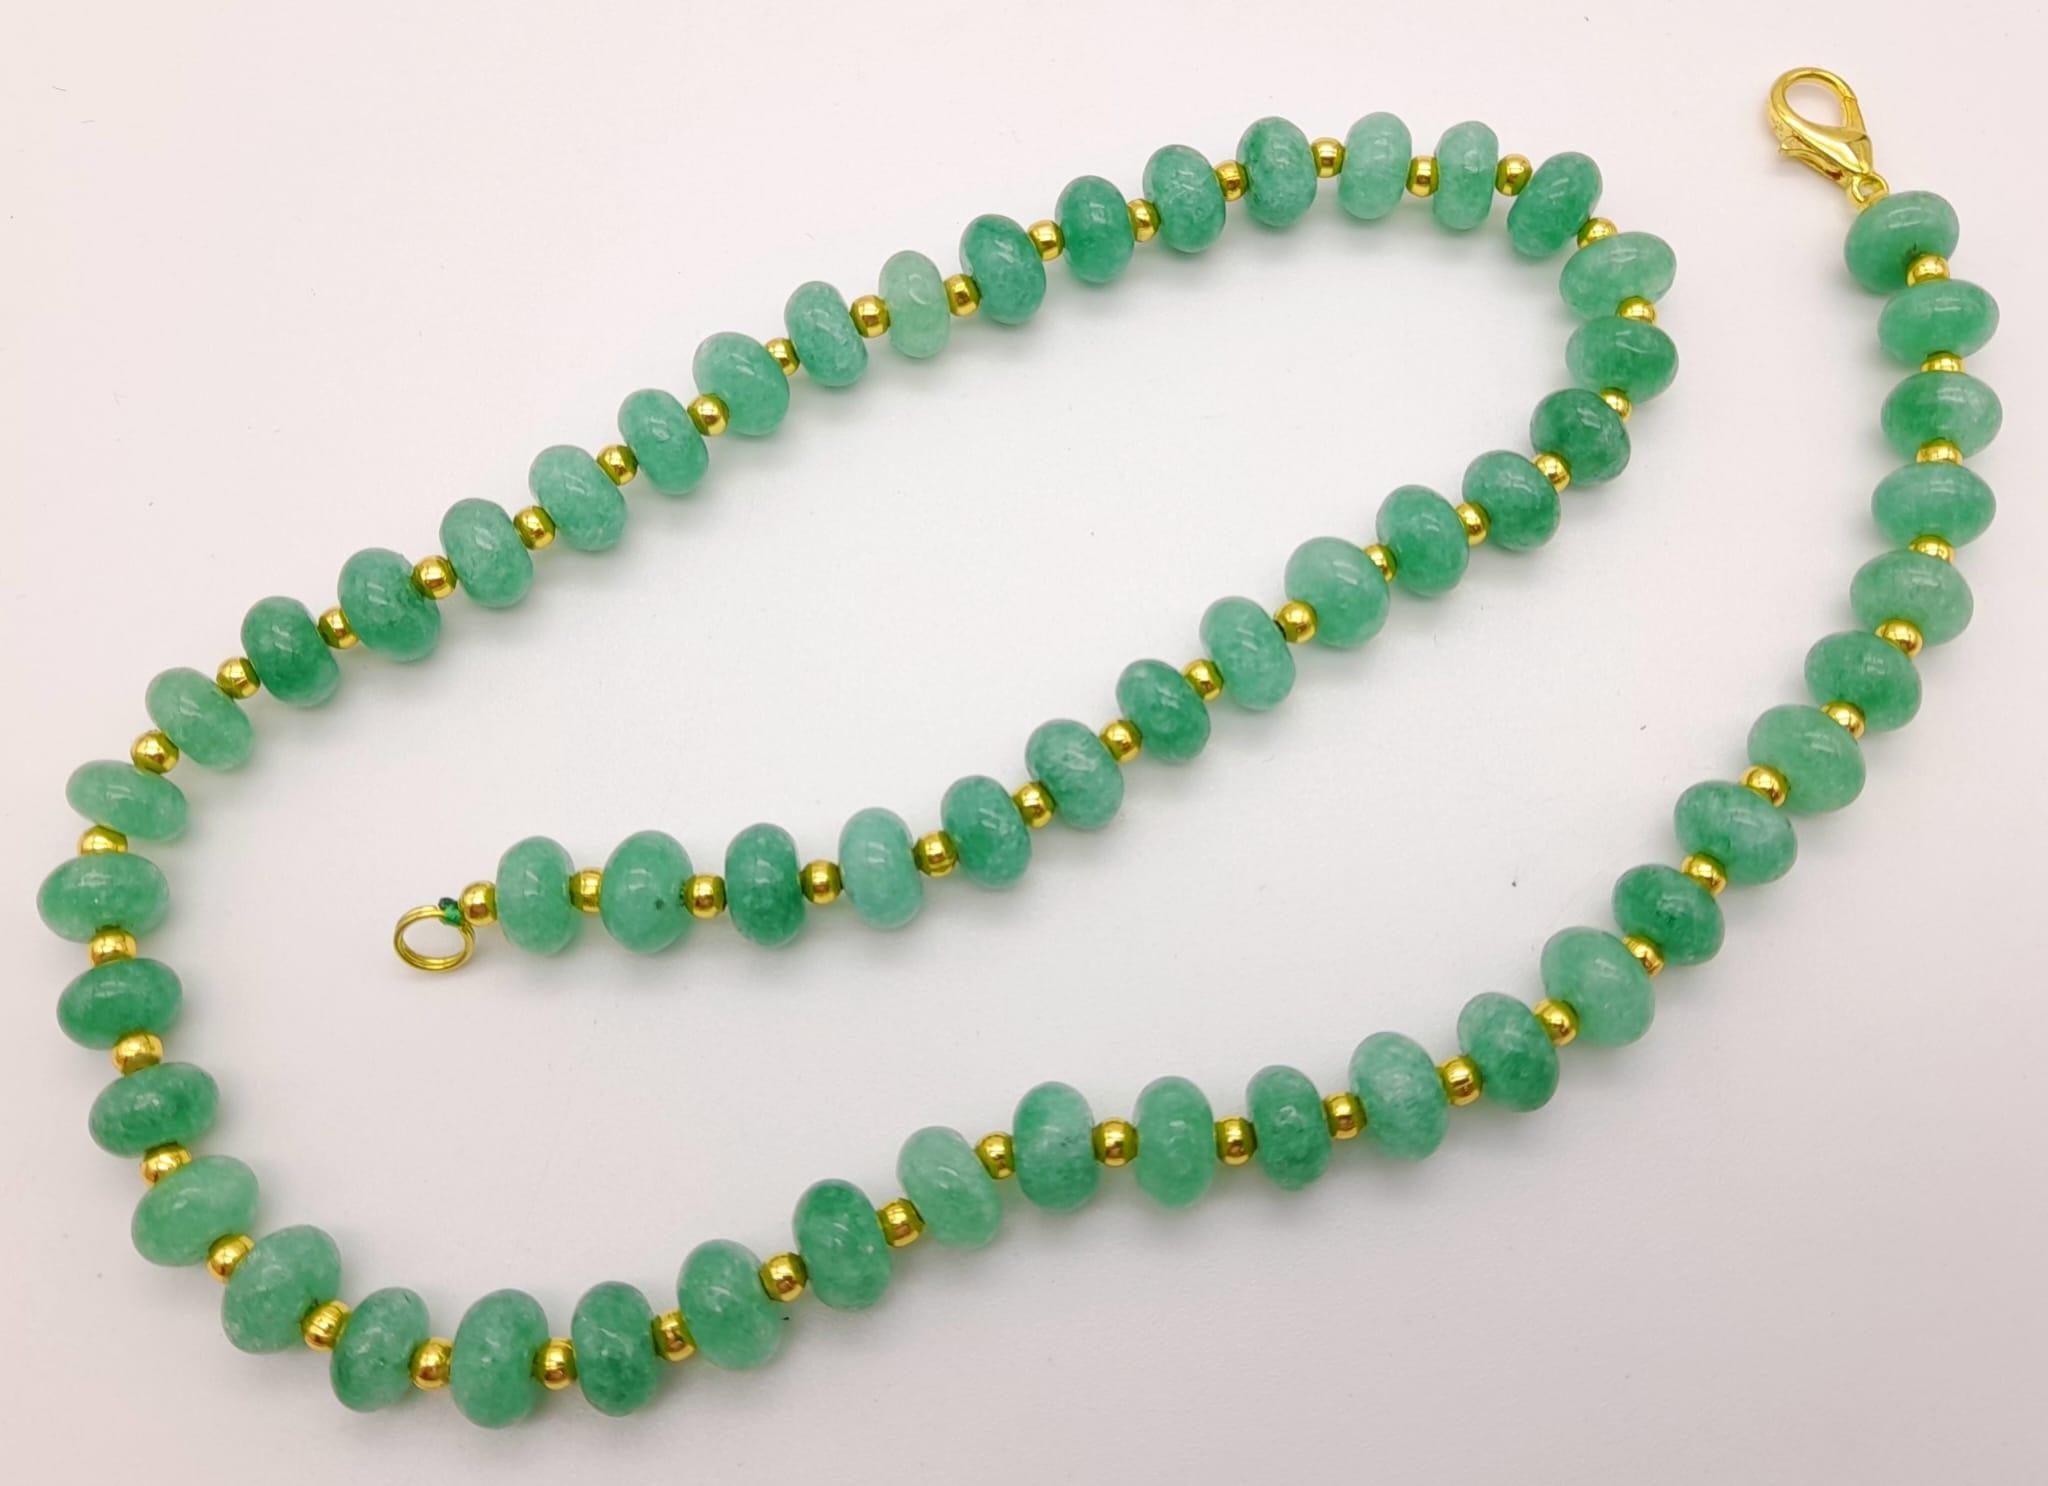 An Emerald Bead Necklace. Gilded spacers and clasp. 44cm. - Image 2 of 3